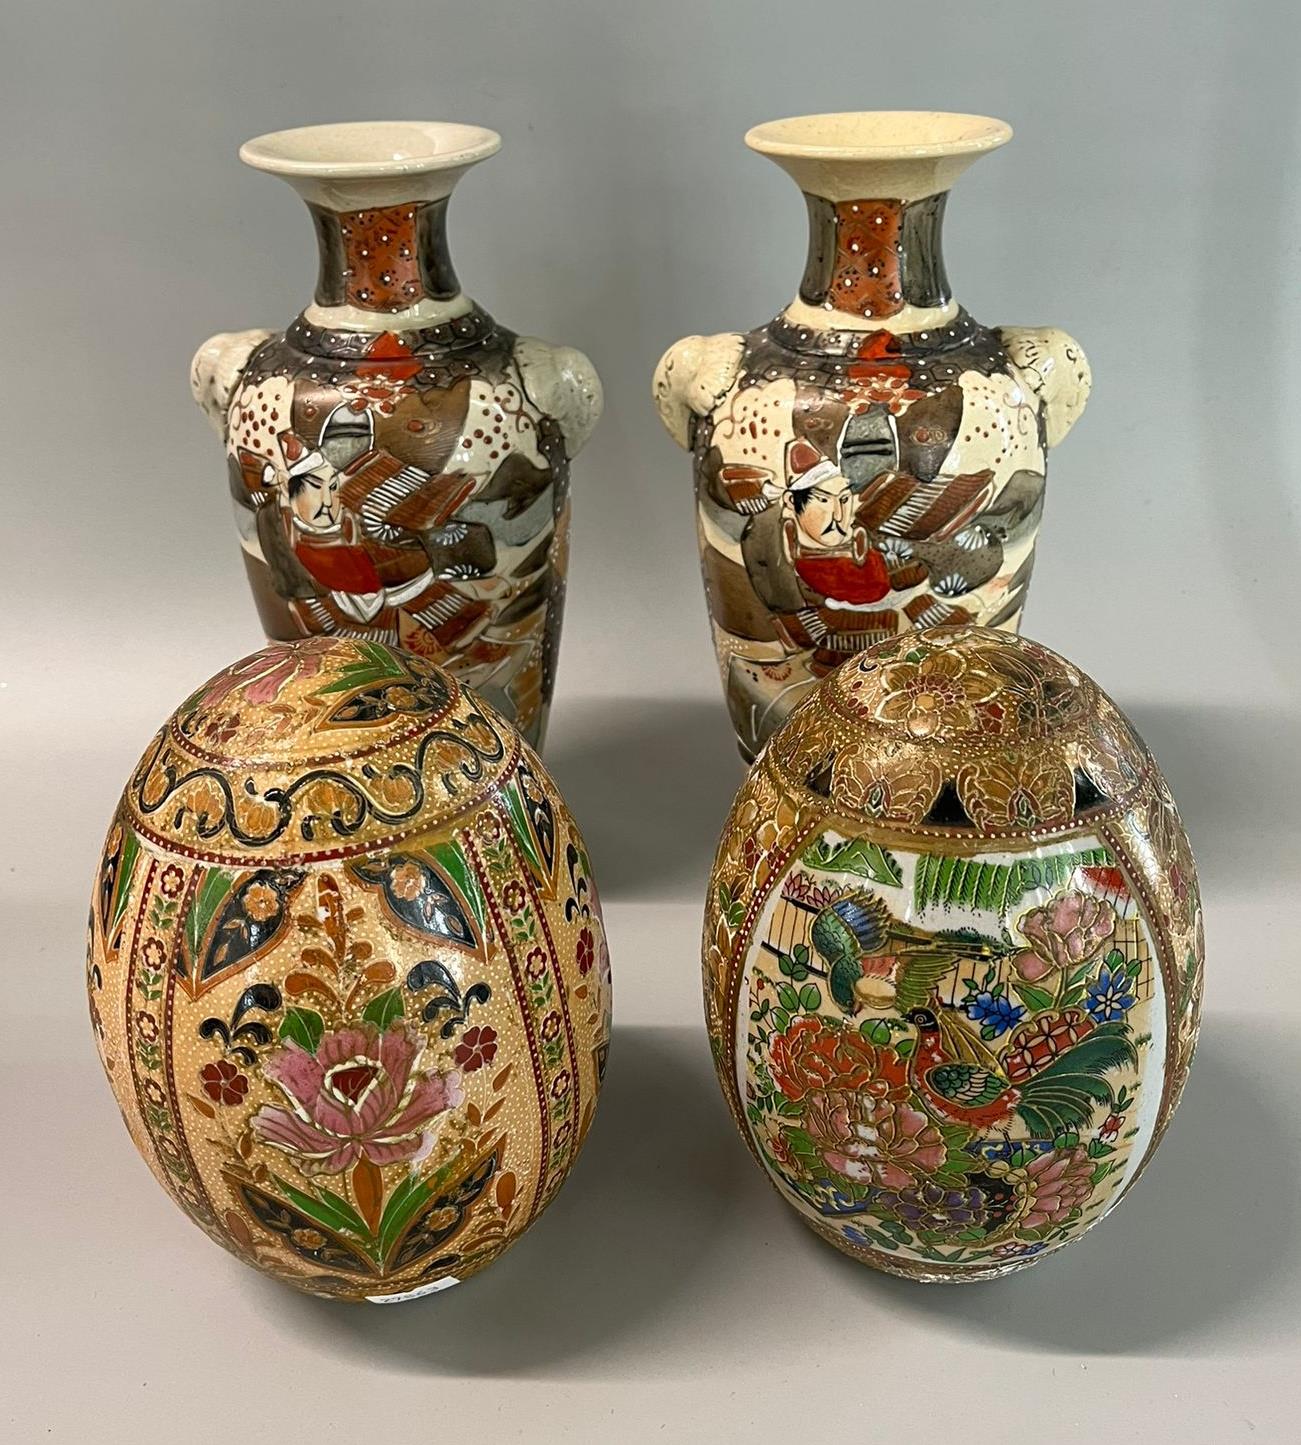 Two Chinese style polychrome ceramic eggs together wit ha pair of Japanese Kyoto Satsuma figural